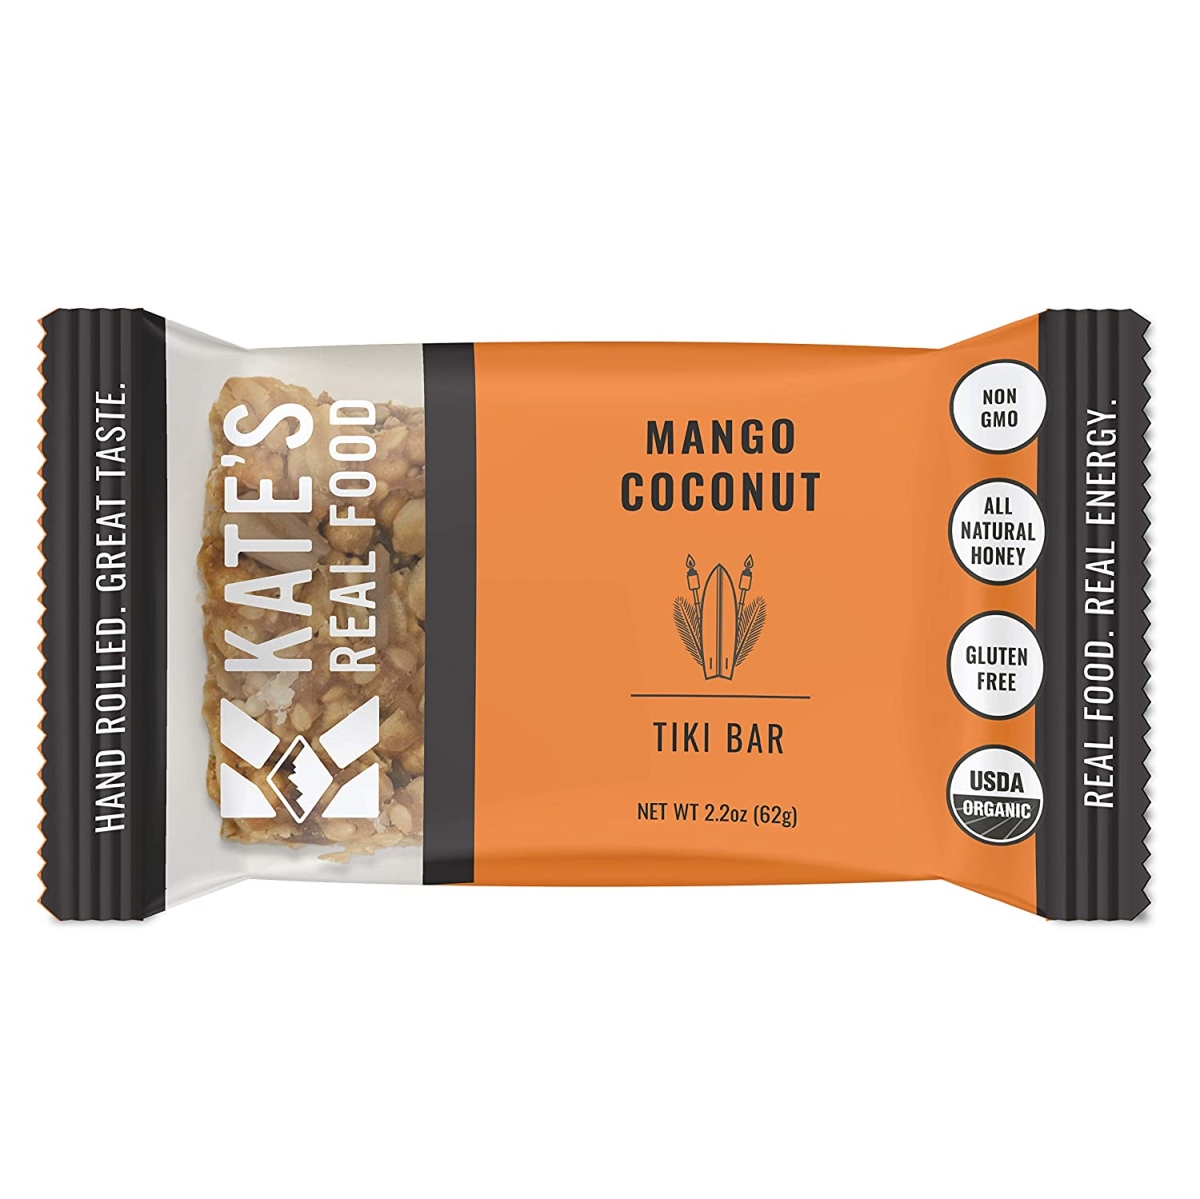 Picture of Kates Real Food 2452654 2.2 oz Mango Coconut Tikky Bar